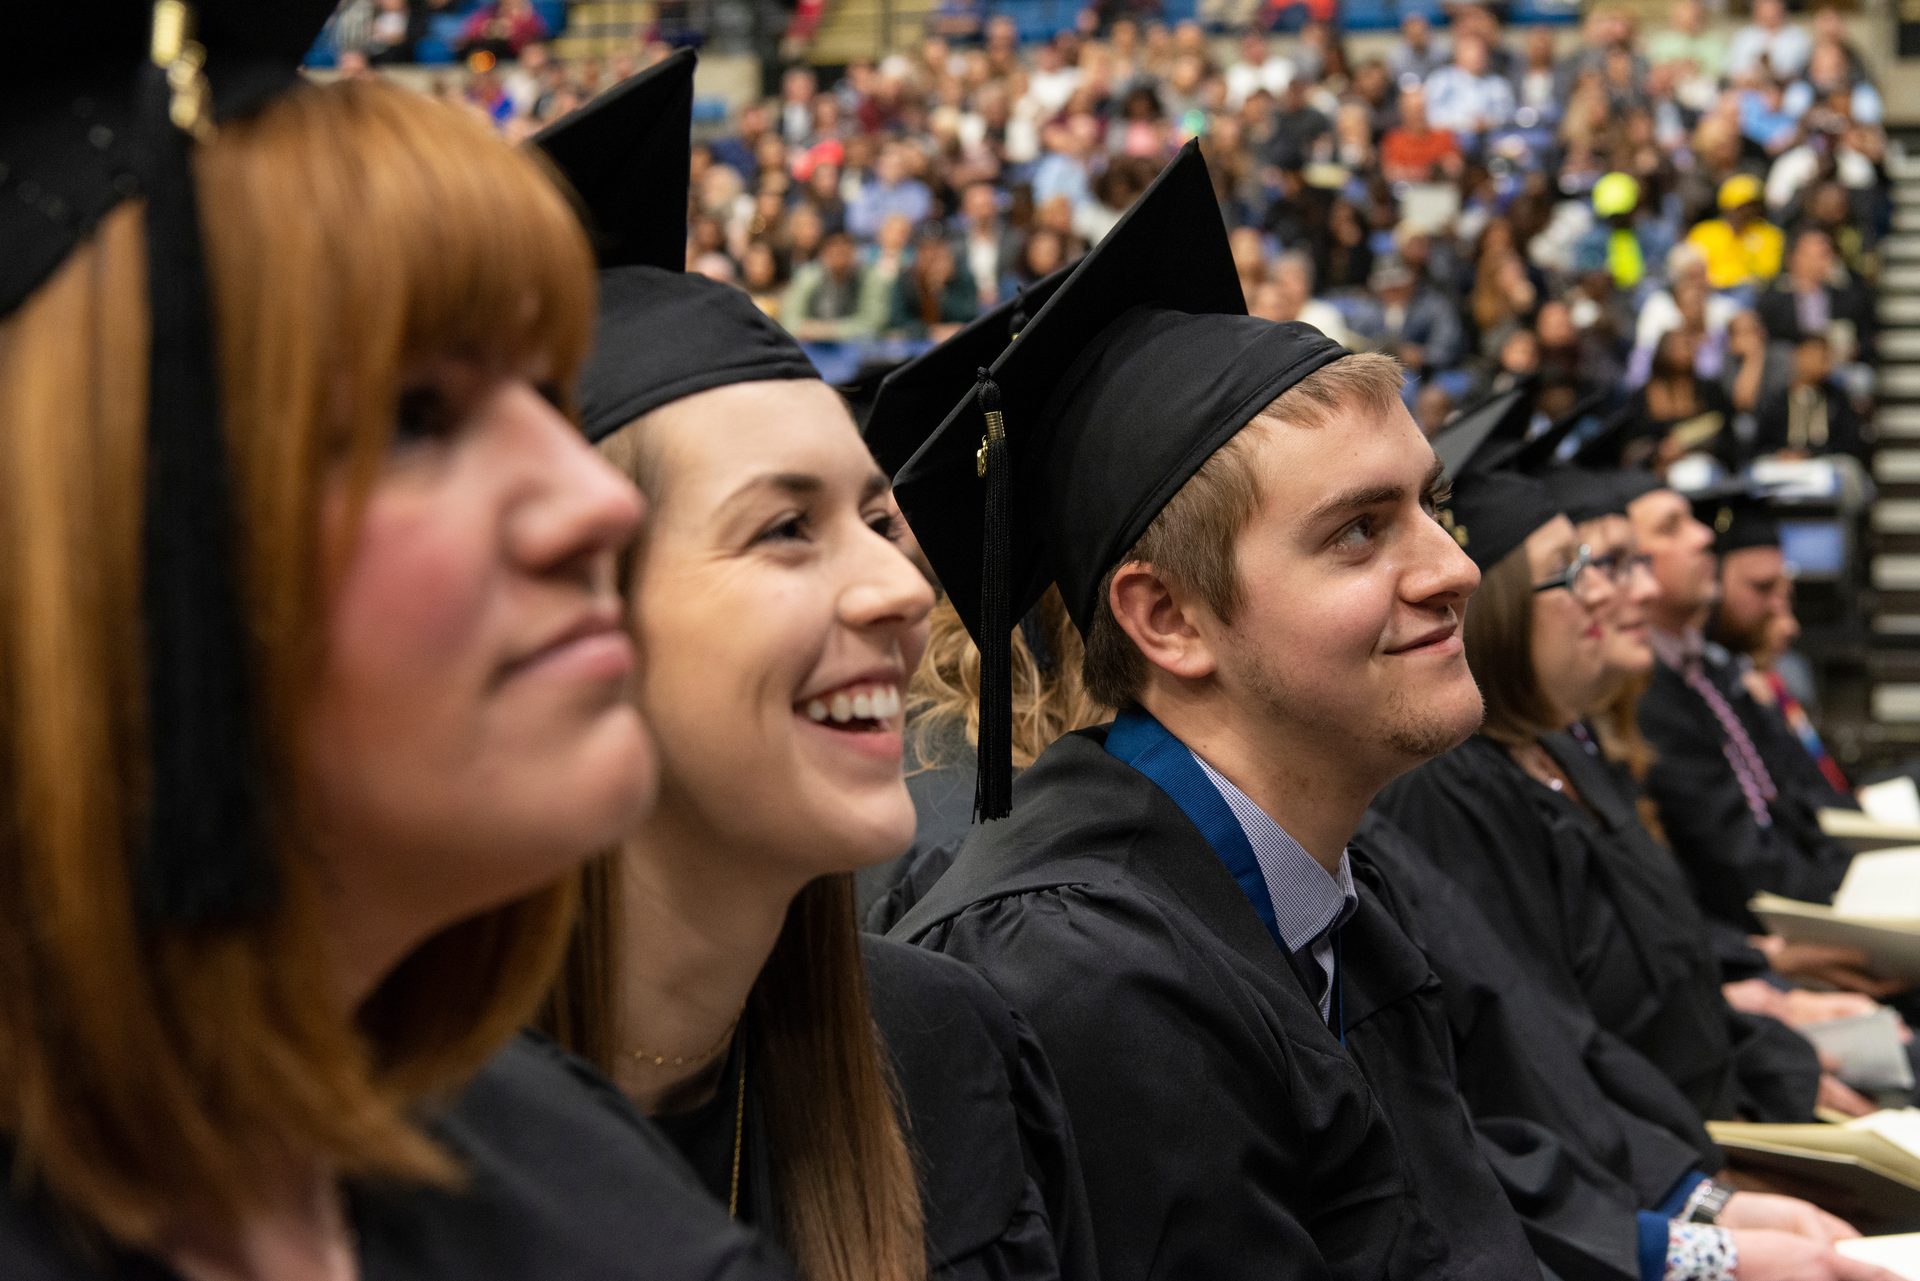 Several students listen to a speaker at a graduation ceremony